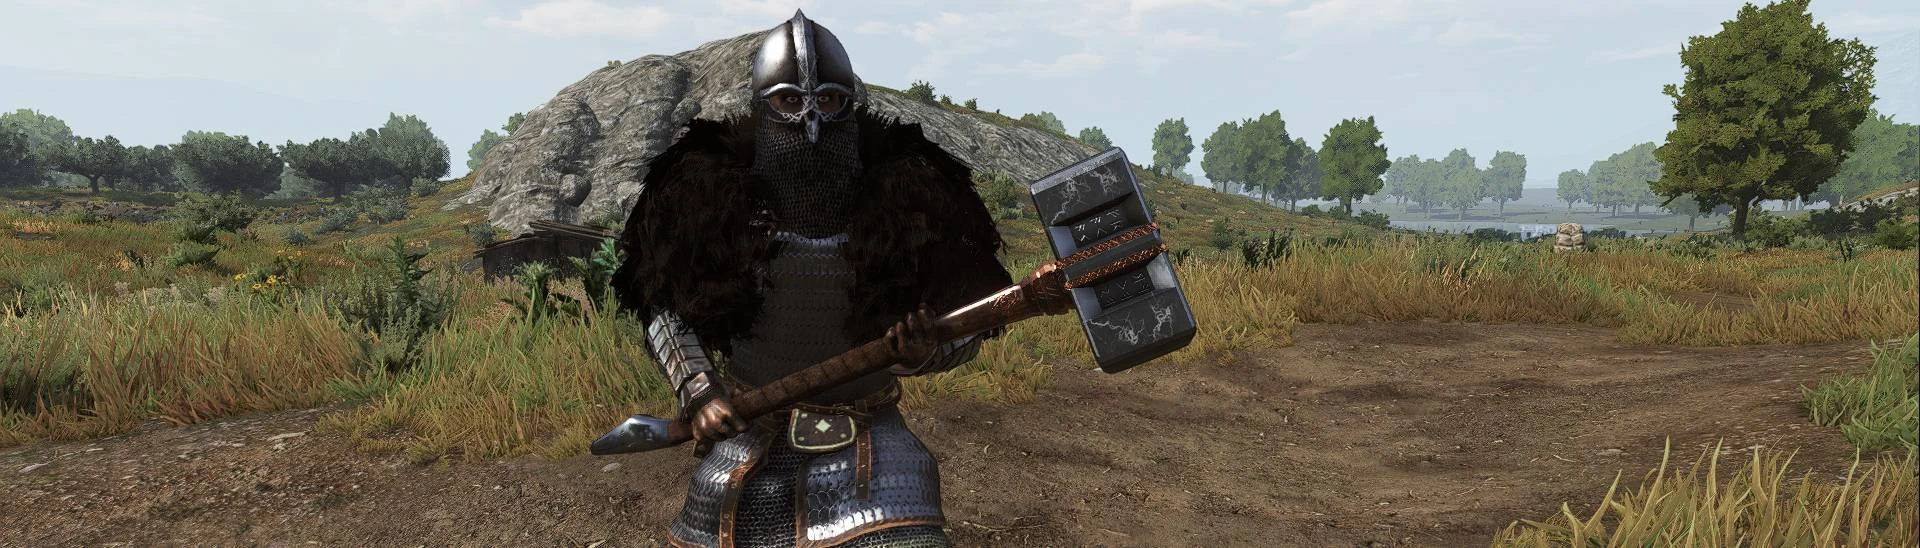 Bannerlord Cheats at Mount & Blade II: Bannerlord Nexus - Mods and community